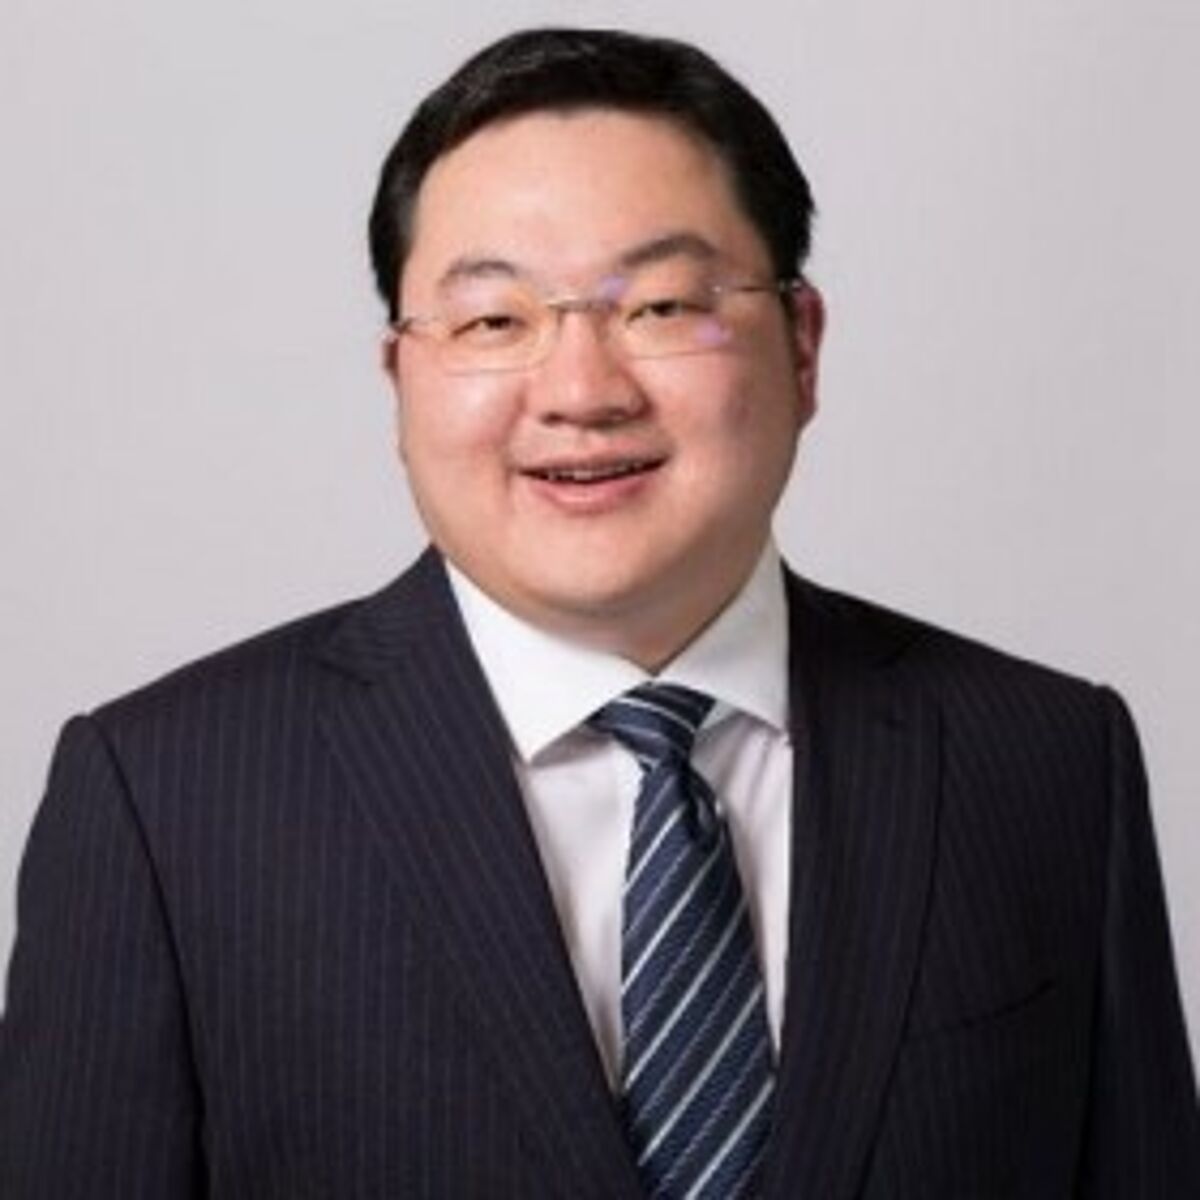 Jho Low Net Worth Details, Personal Info